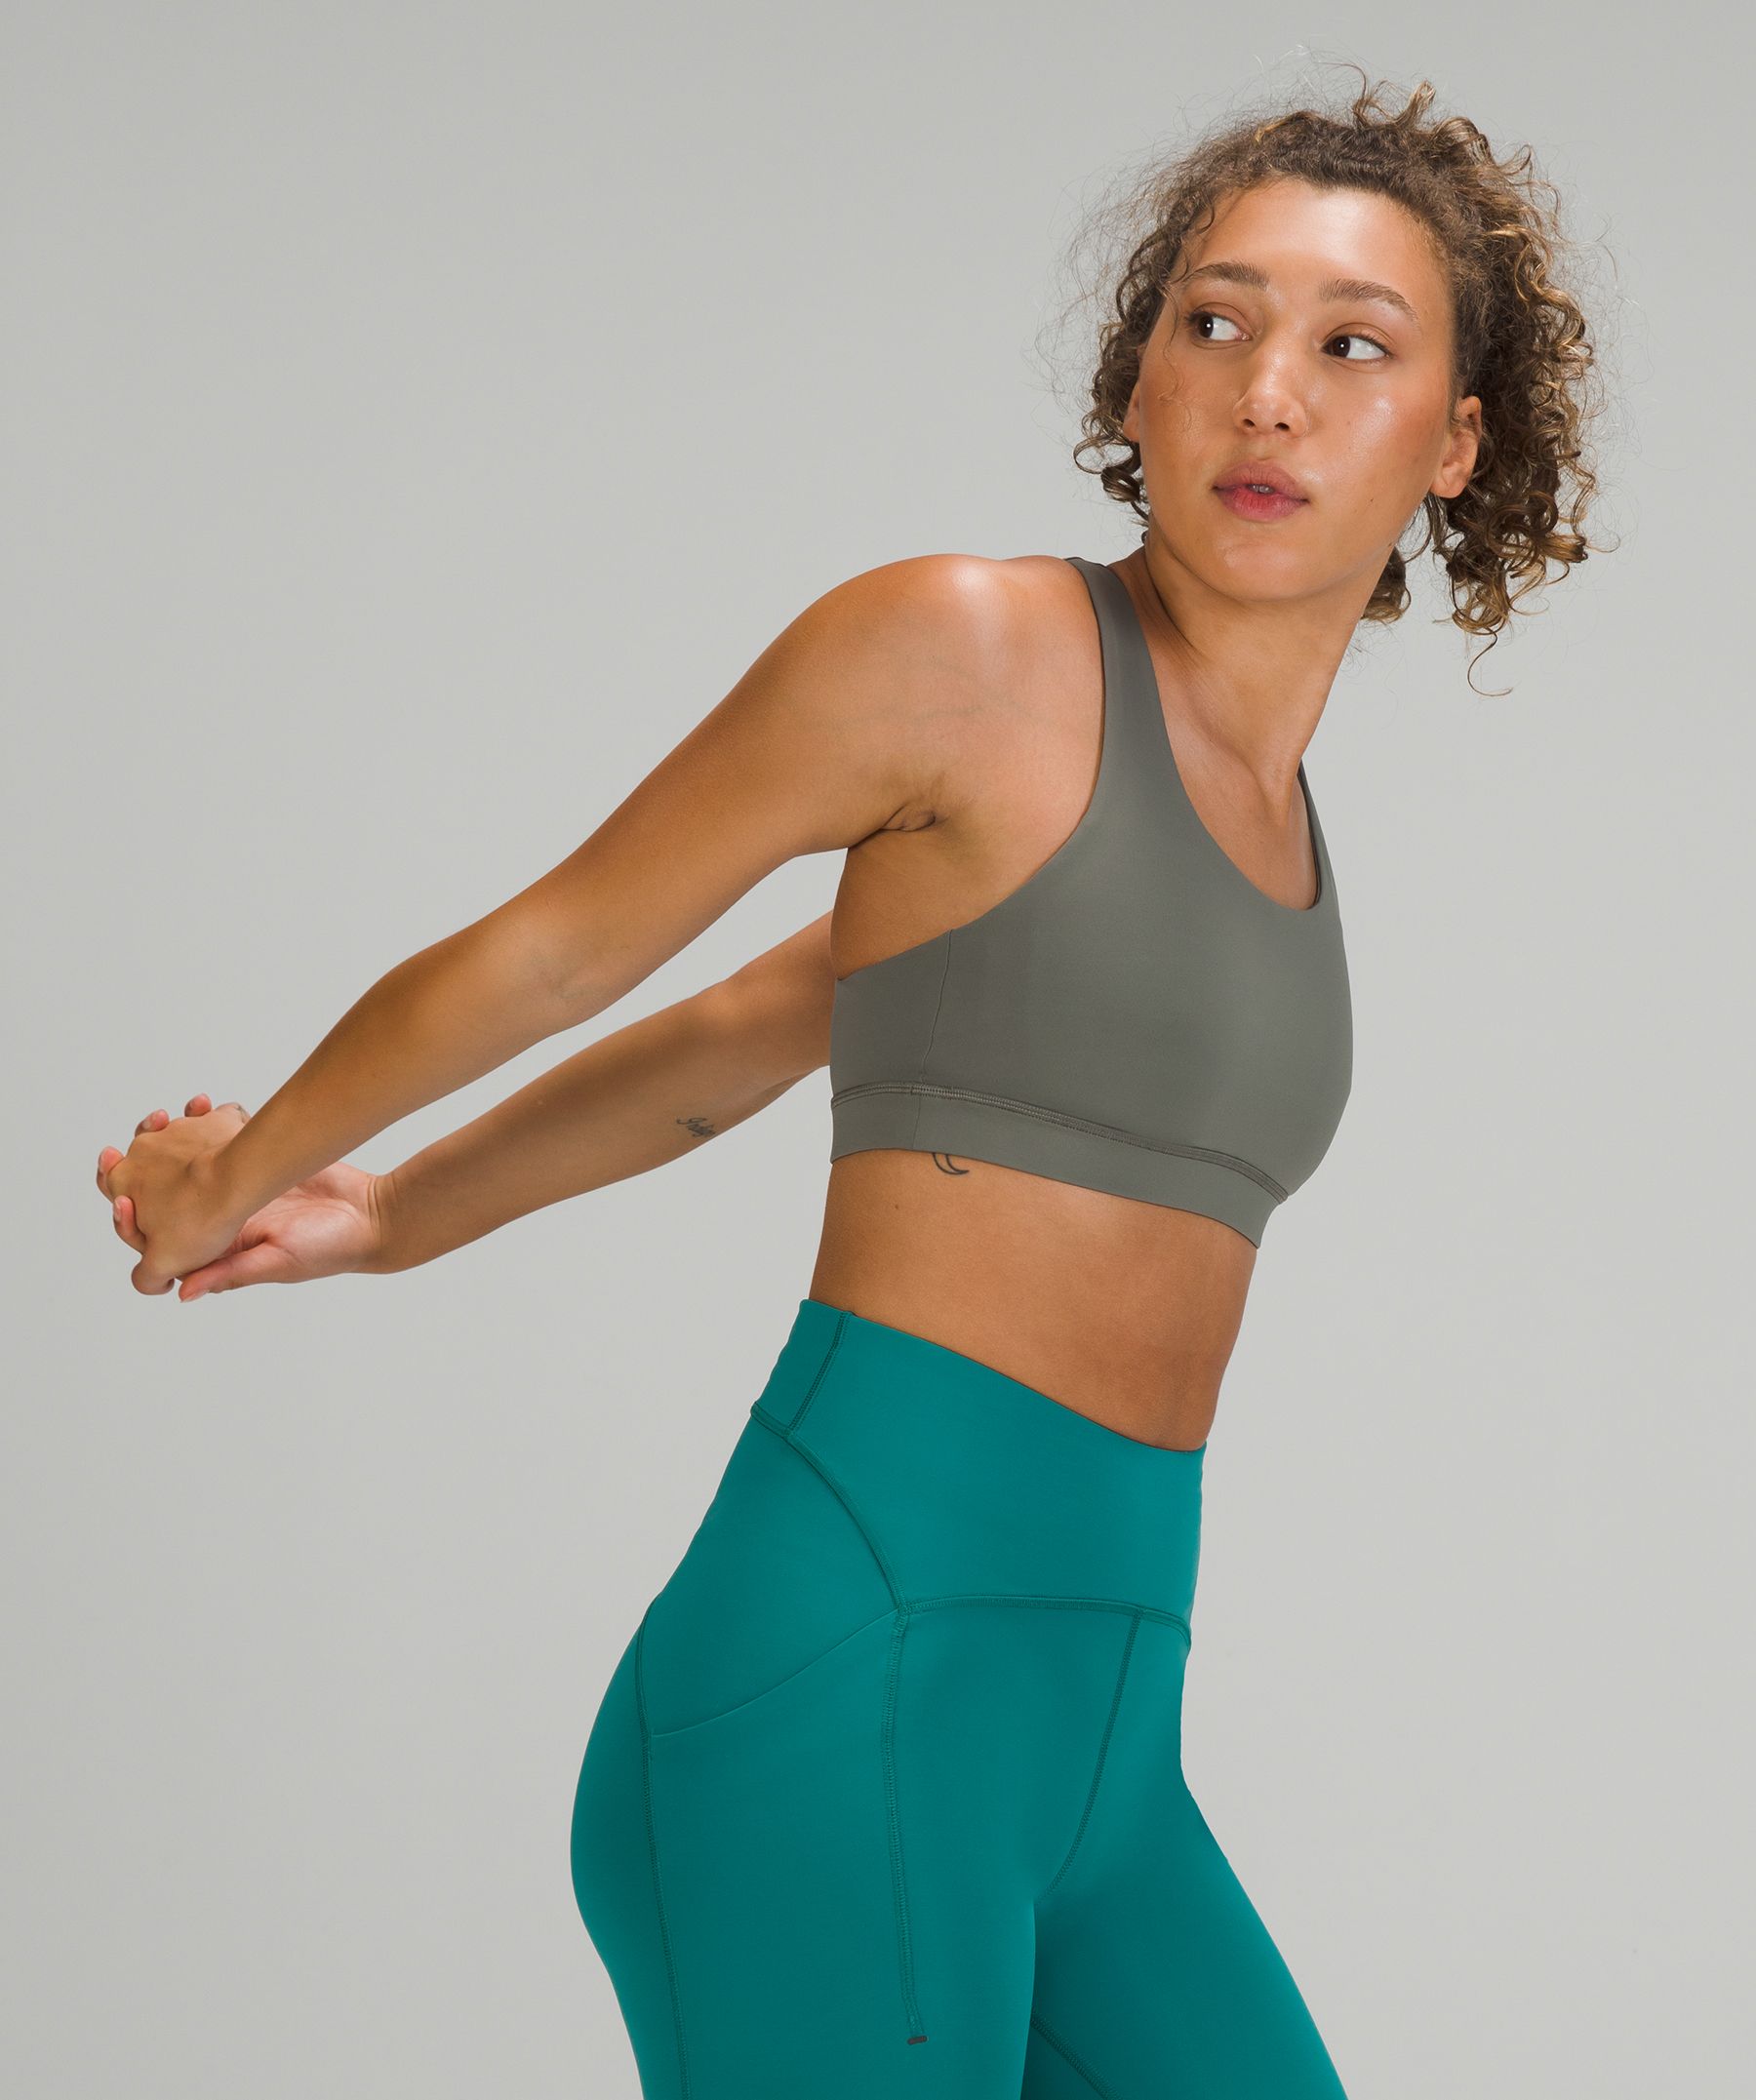 Lululemon Invigorate Bra with Clasp *High Support, B/C Cup